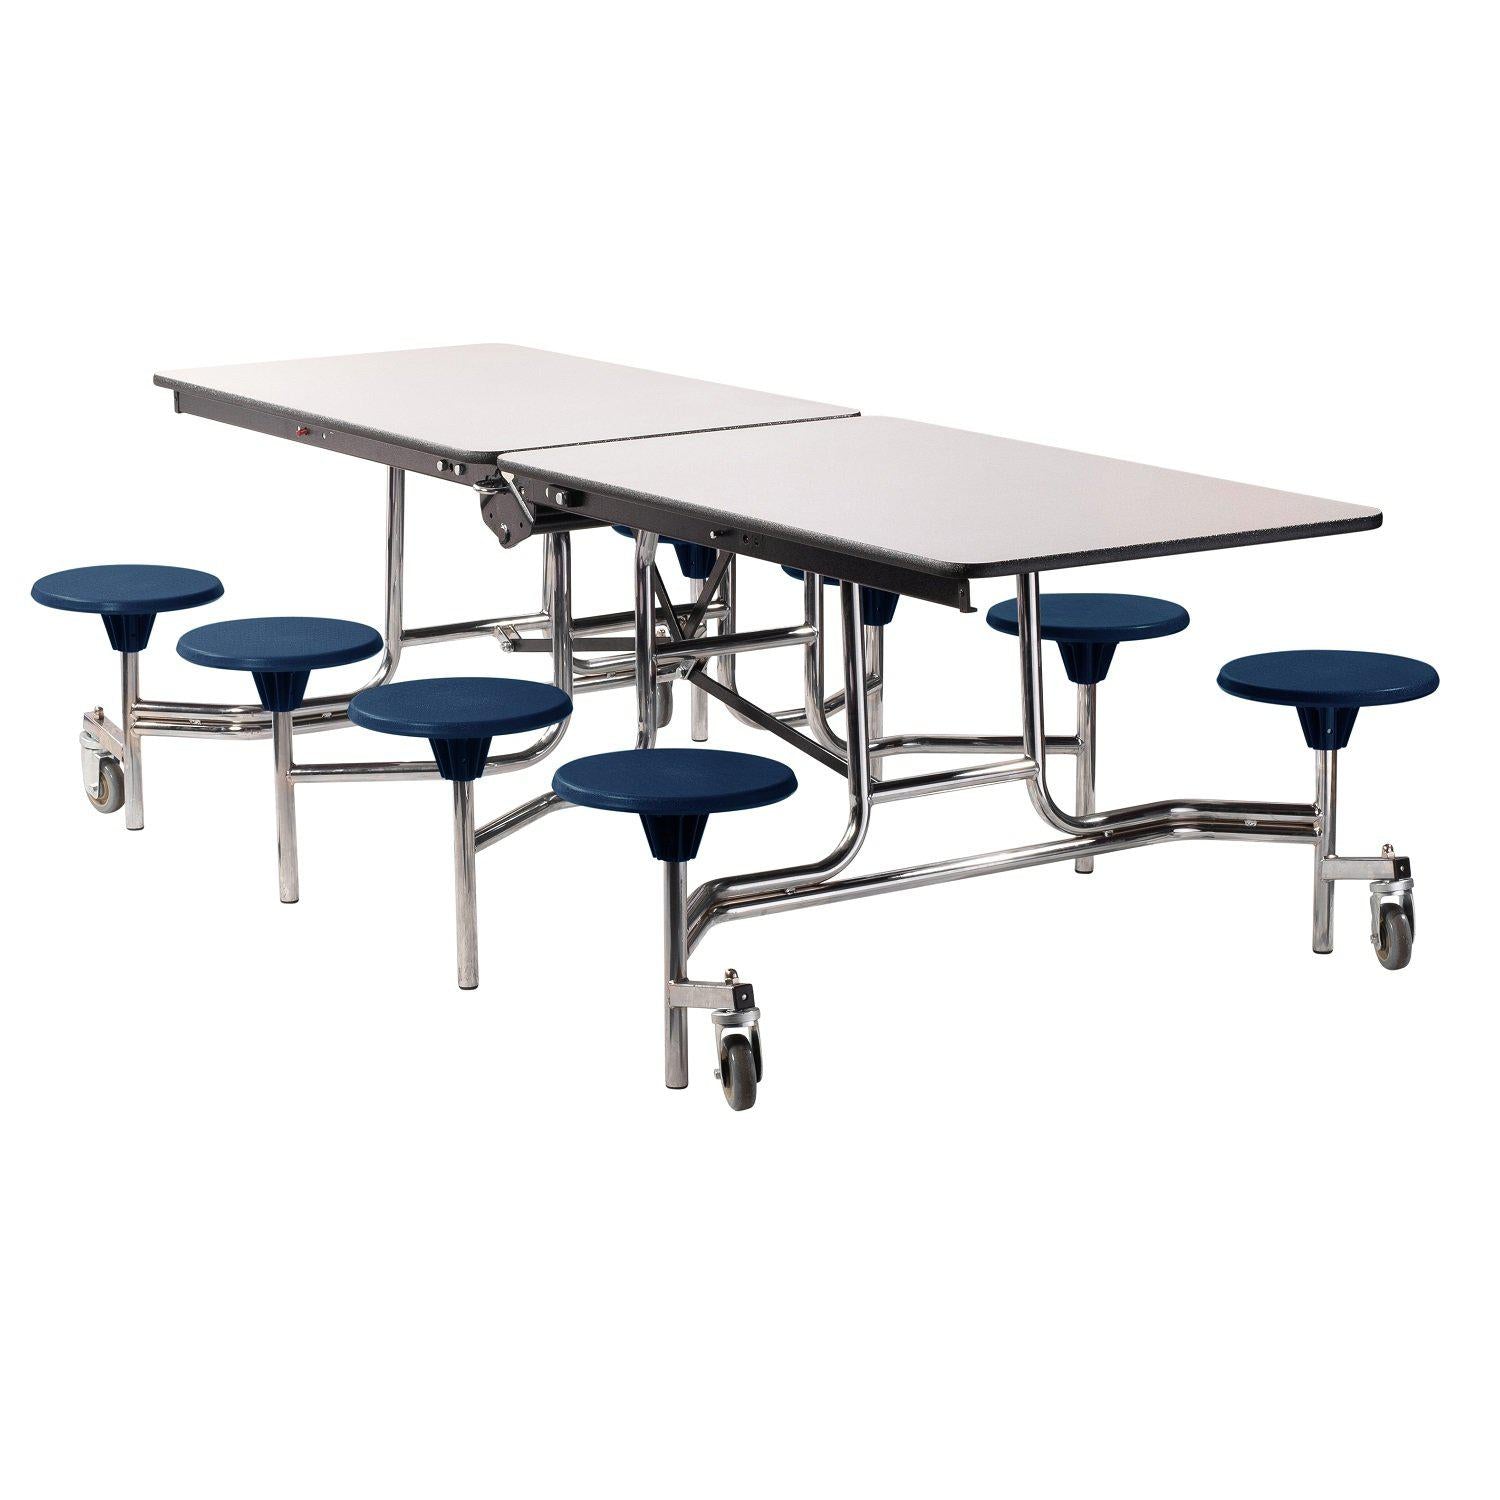 Mobile Cafeteria Table with 8 Stools, 8'L Rectangular, MDF Core, ProtectEdge, Chrome Frame